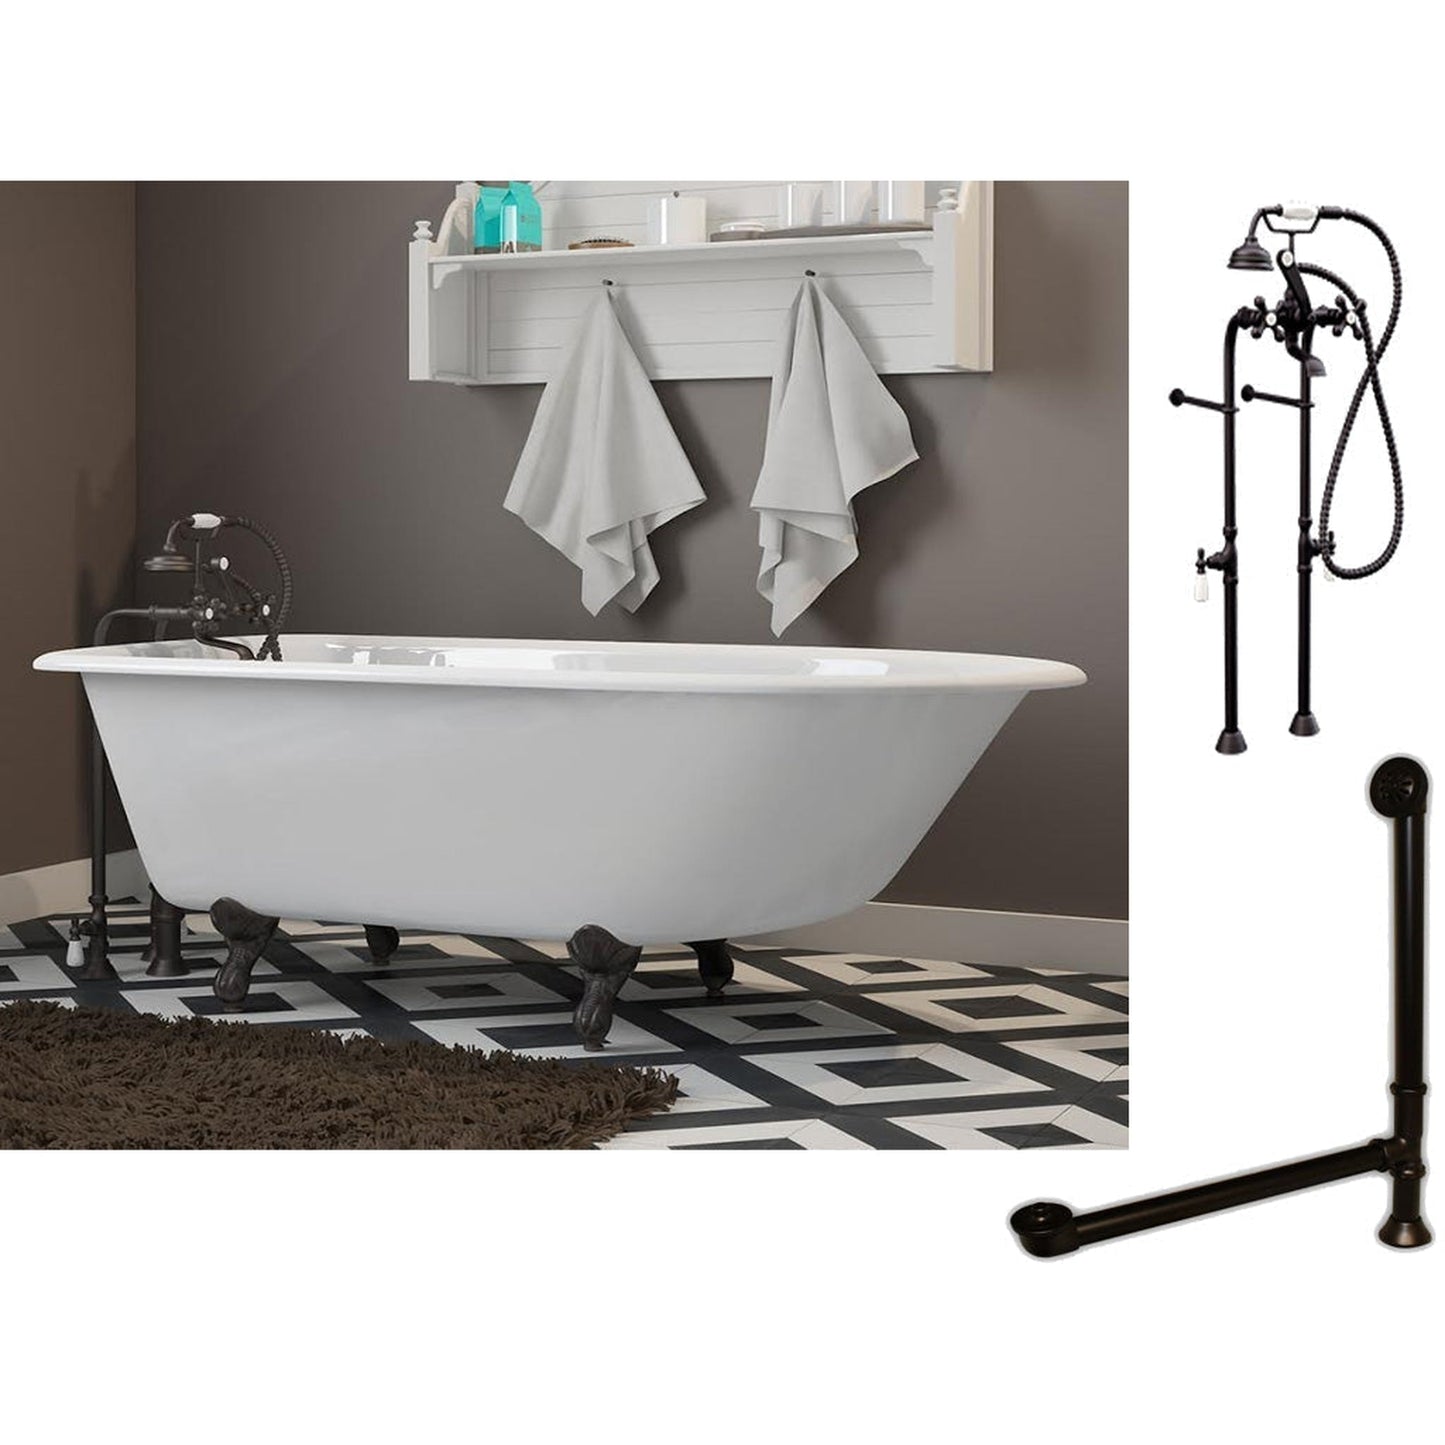 Cambridge Plumbing 60" White Cast Iron Rolled Rim Clawfoot Bathtub With No Deck Holes And Complete Plumbing Package Including Floor Mounted British Telephone Faucet, Drain And Overflow Assembly In Oil Rubbed Bronze